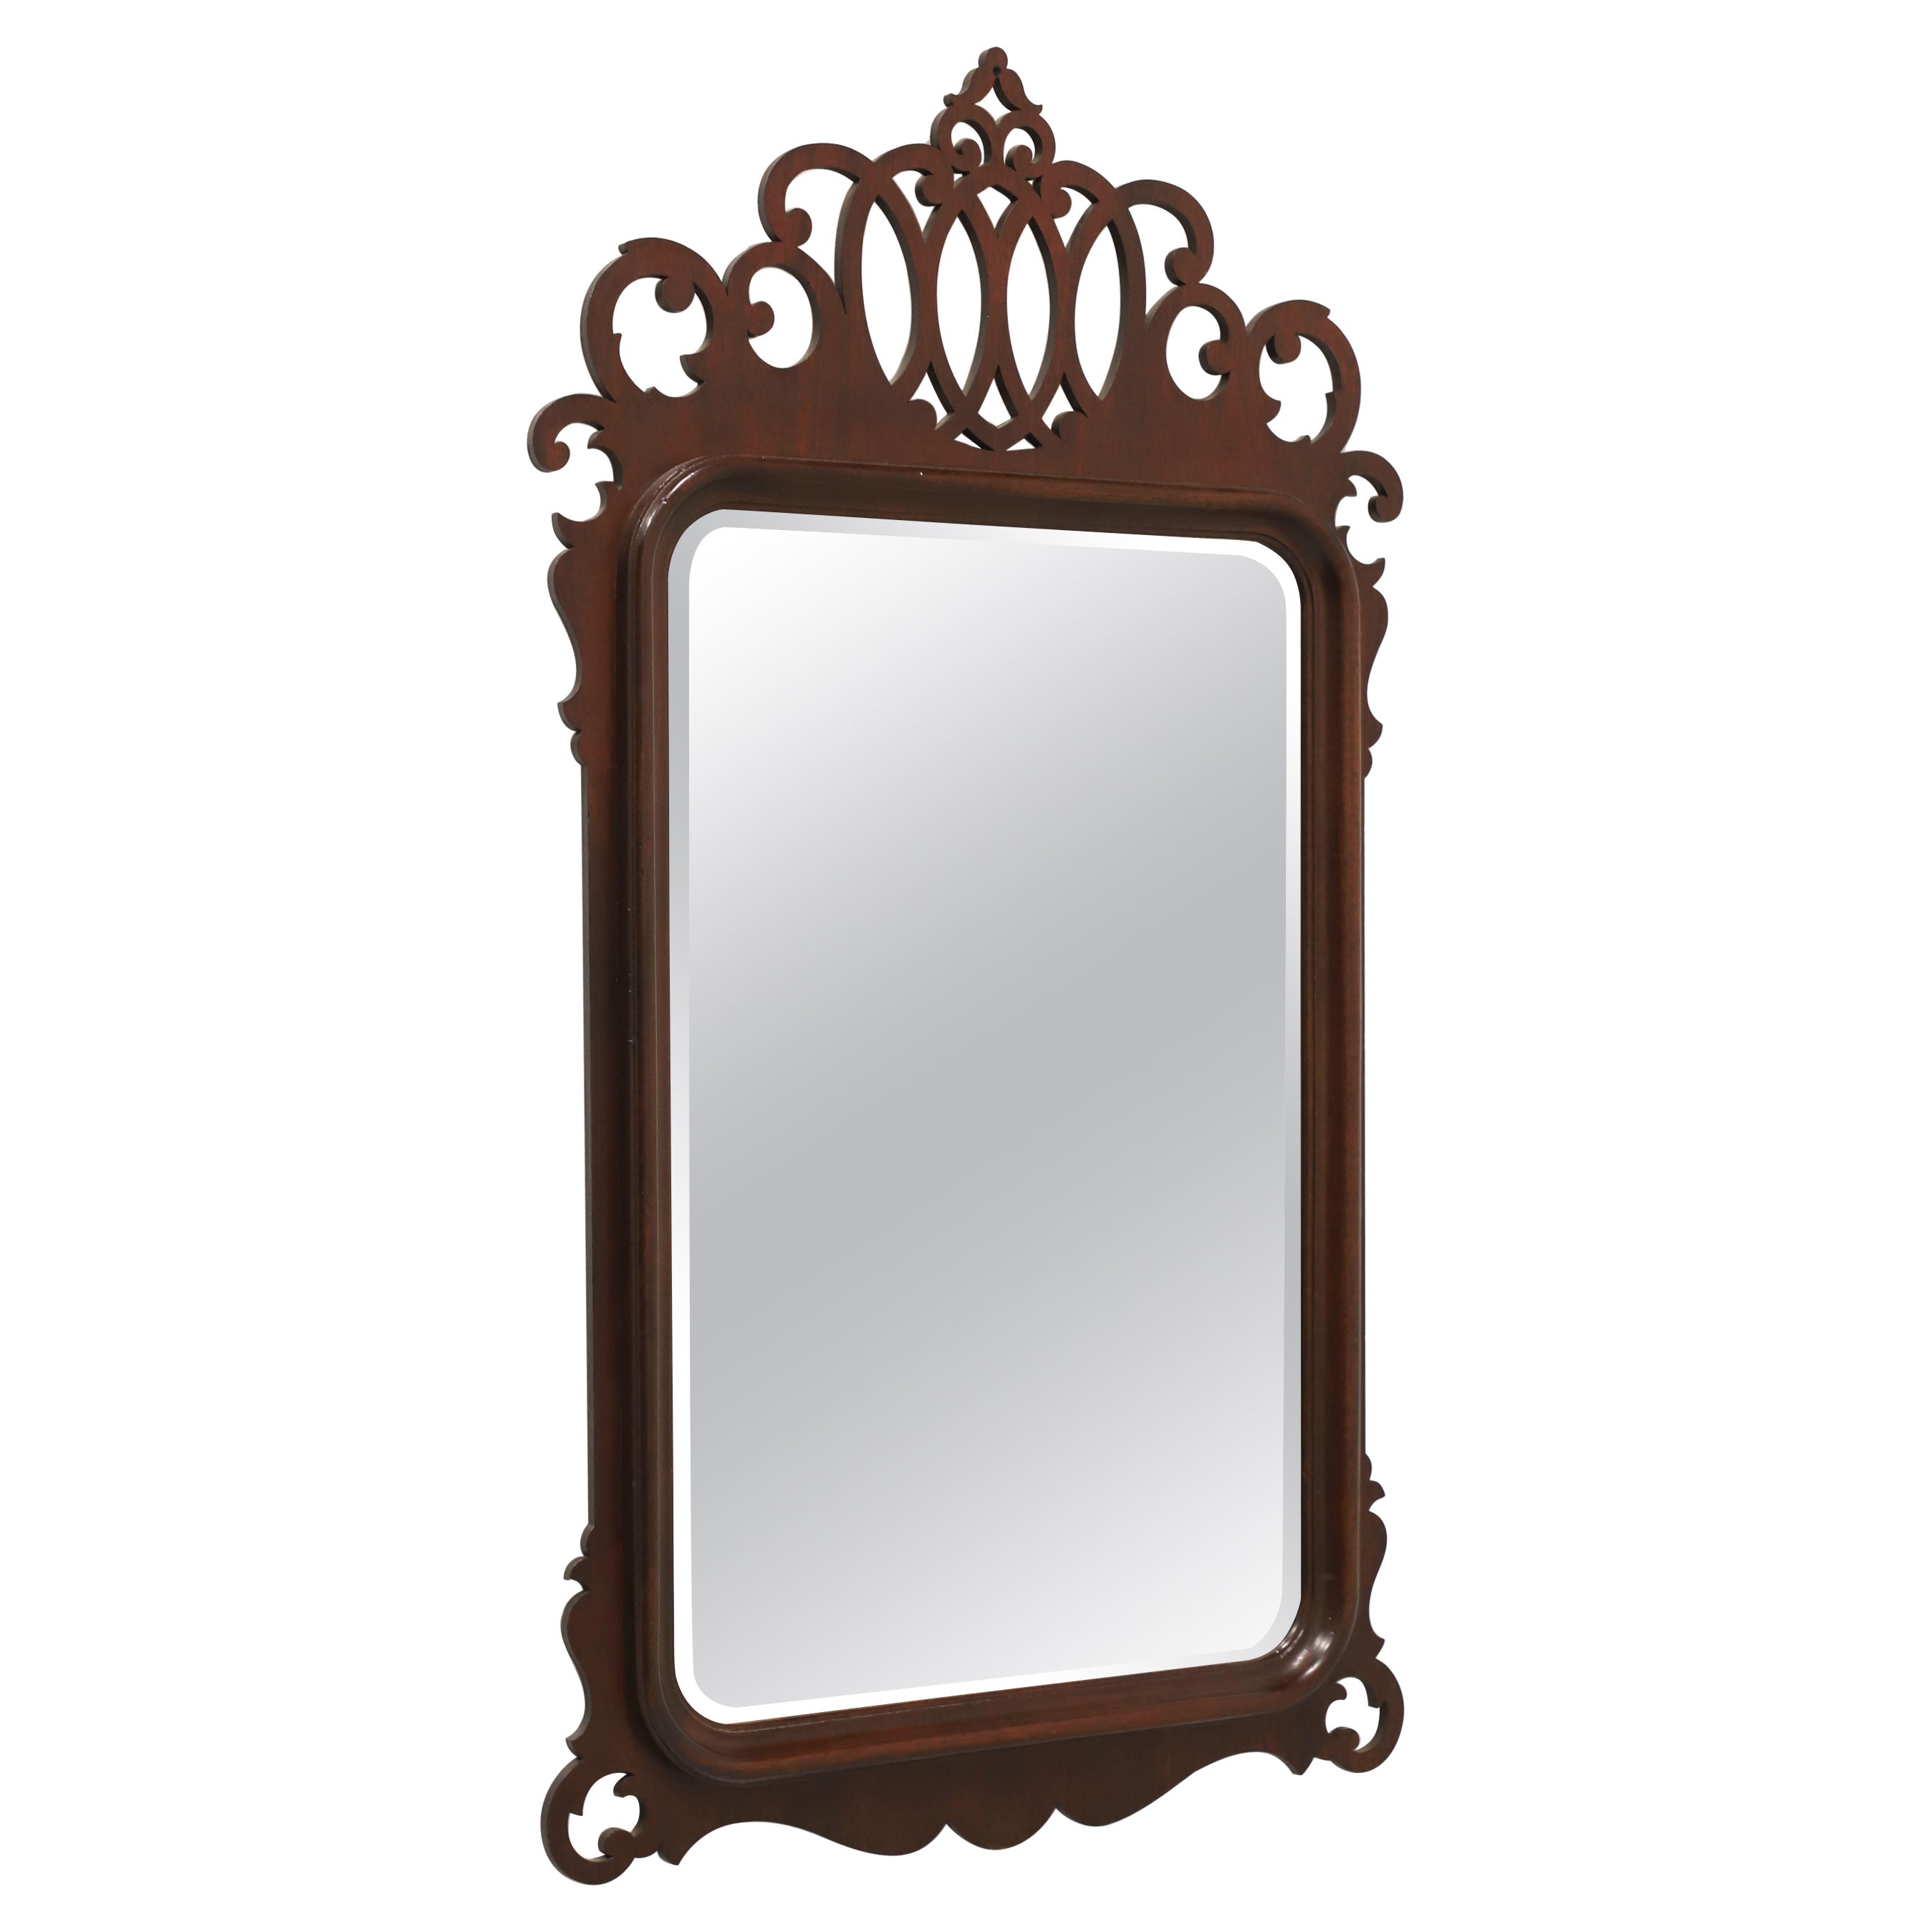 LEXINGTON Distressed Mahogany Chippendale Style Beveled Wall Mirror